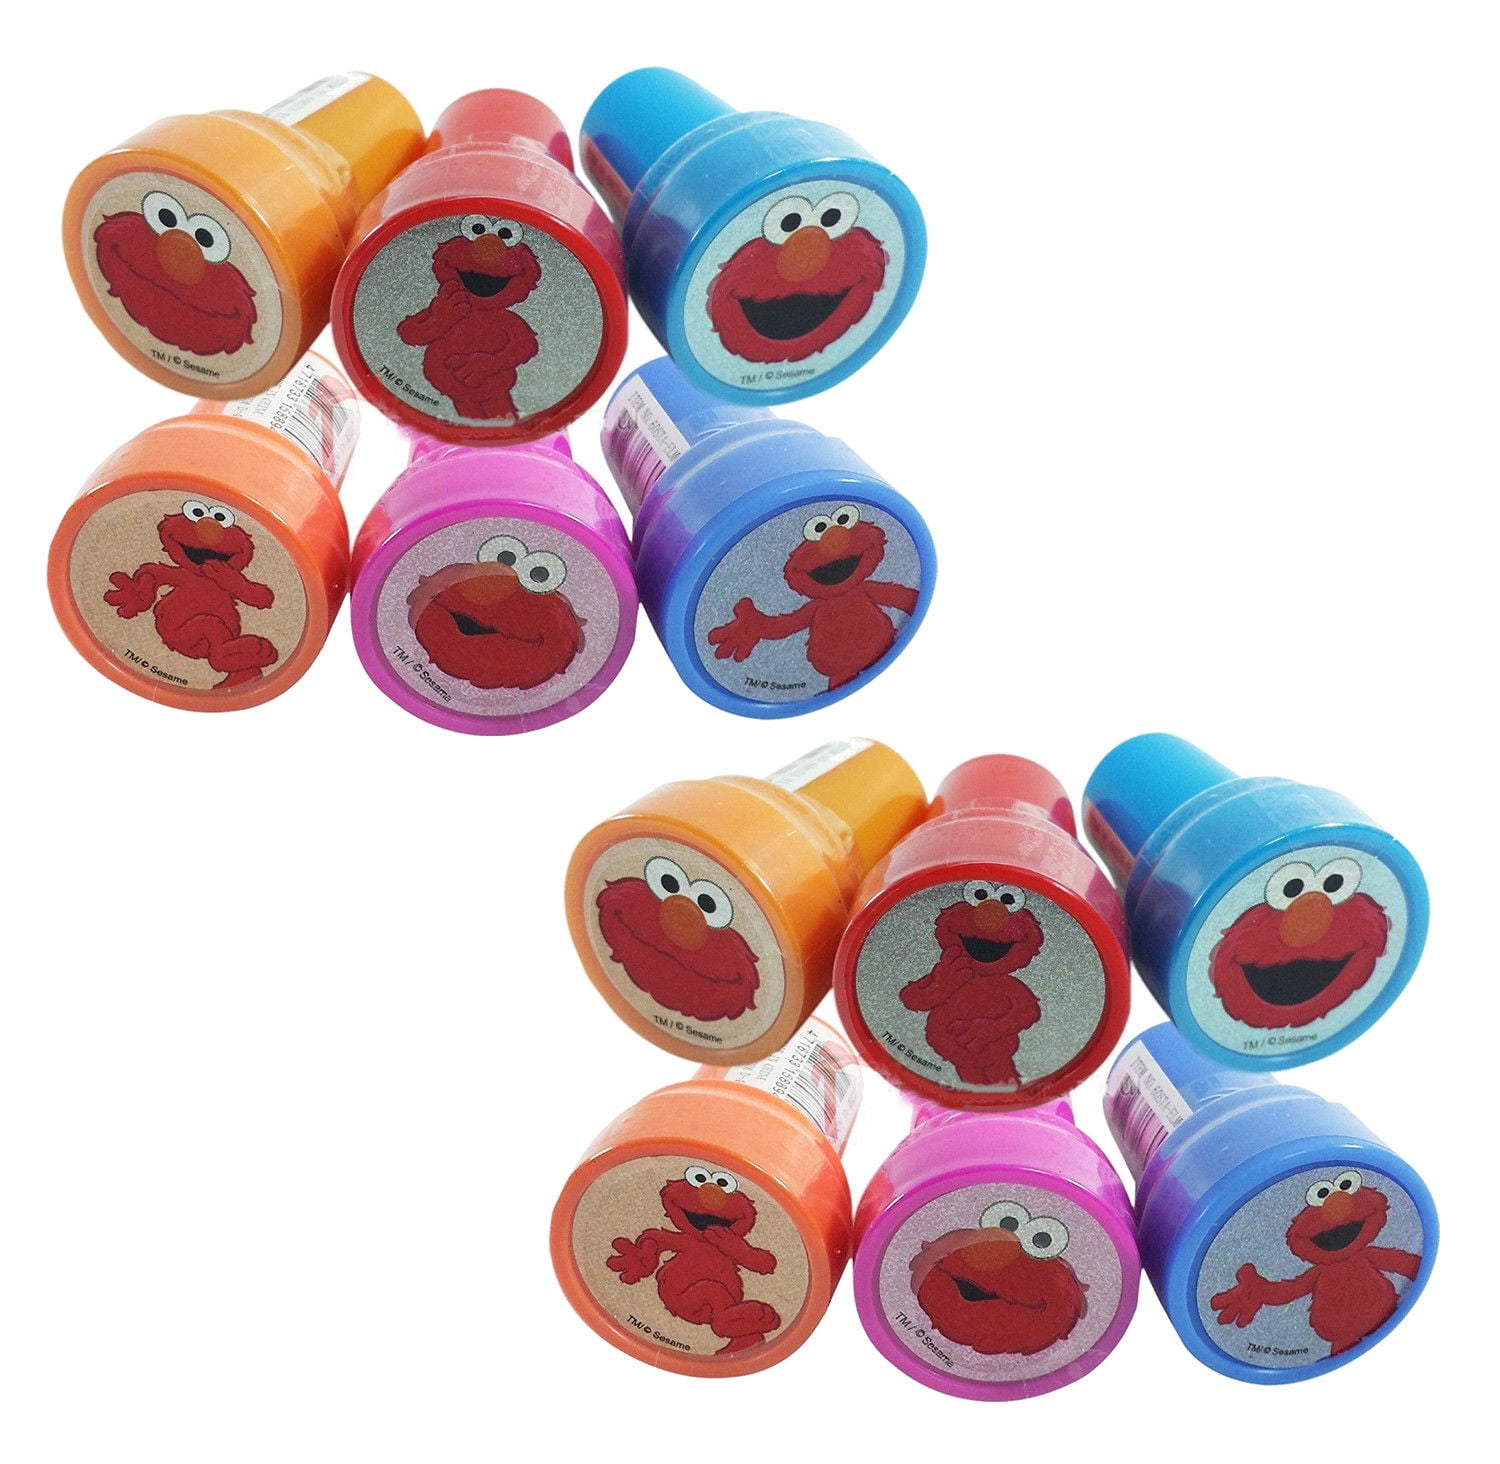 12pcs Sesame Street Elmo Stamps Stampers Self-inking Birthday Party Favors